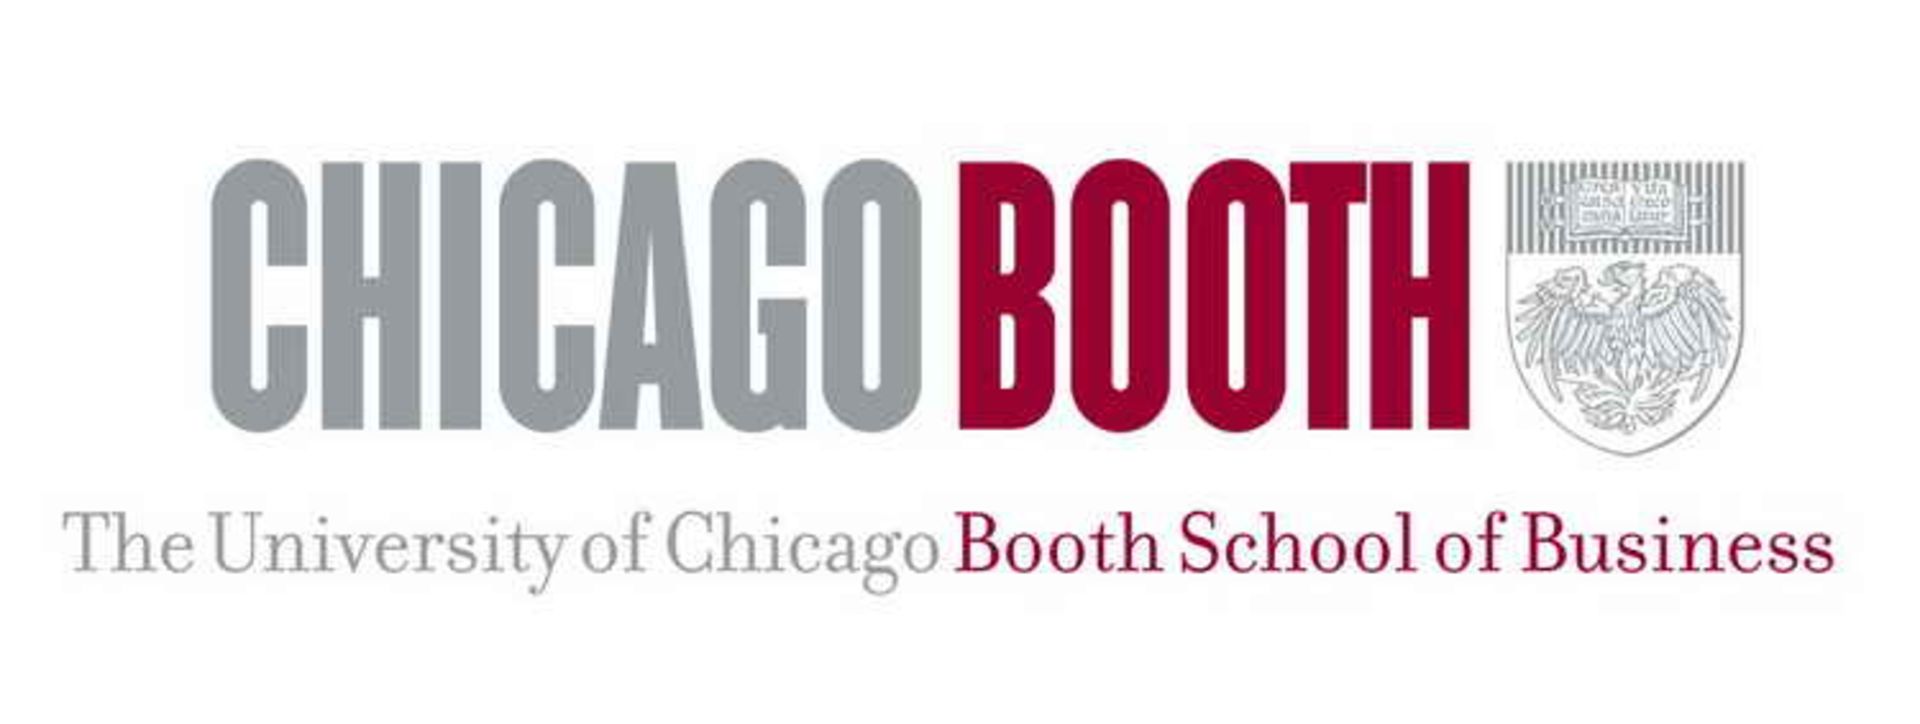 Booth School of Business logo